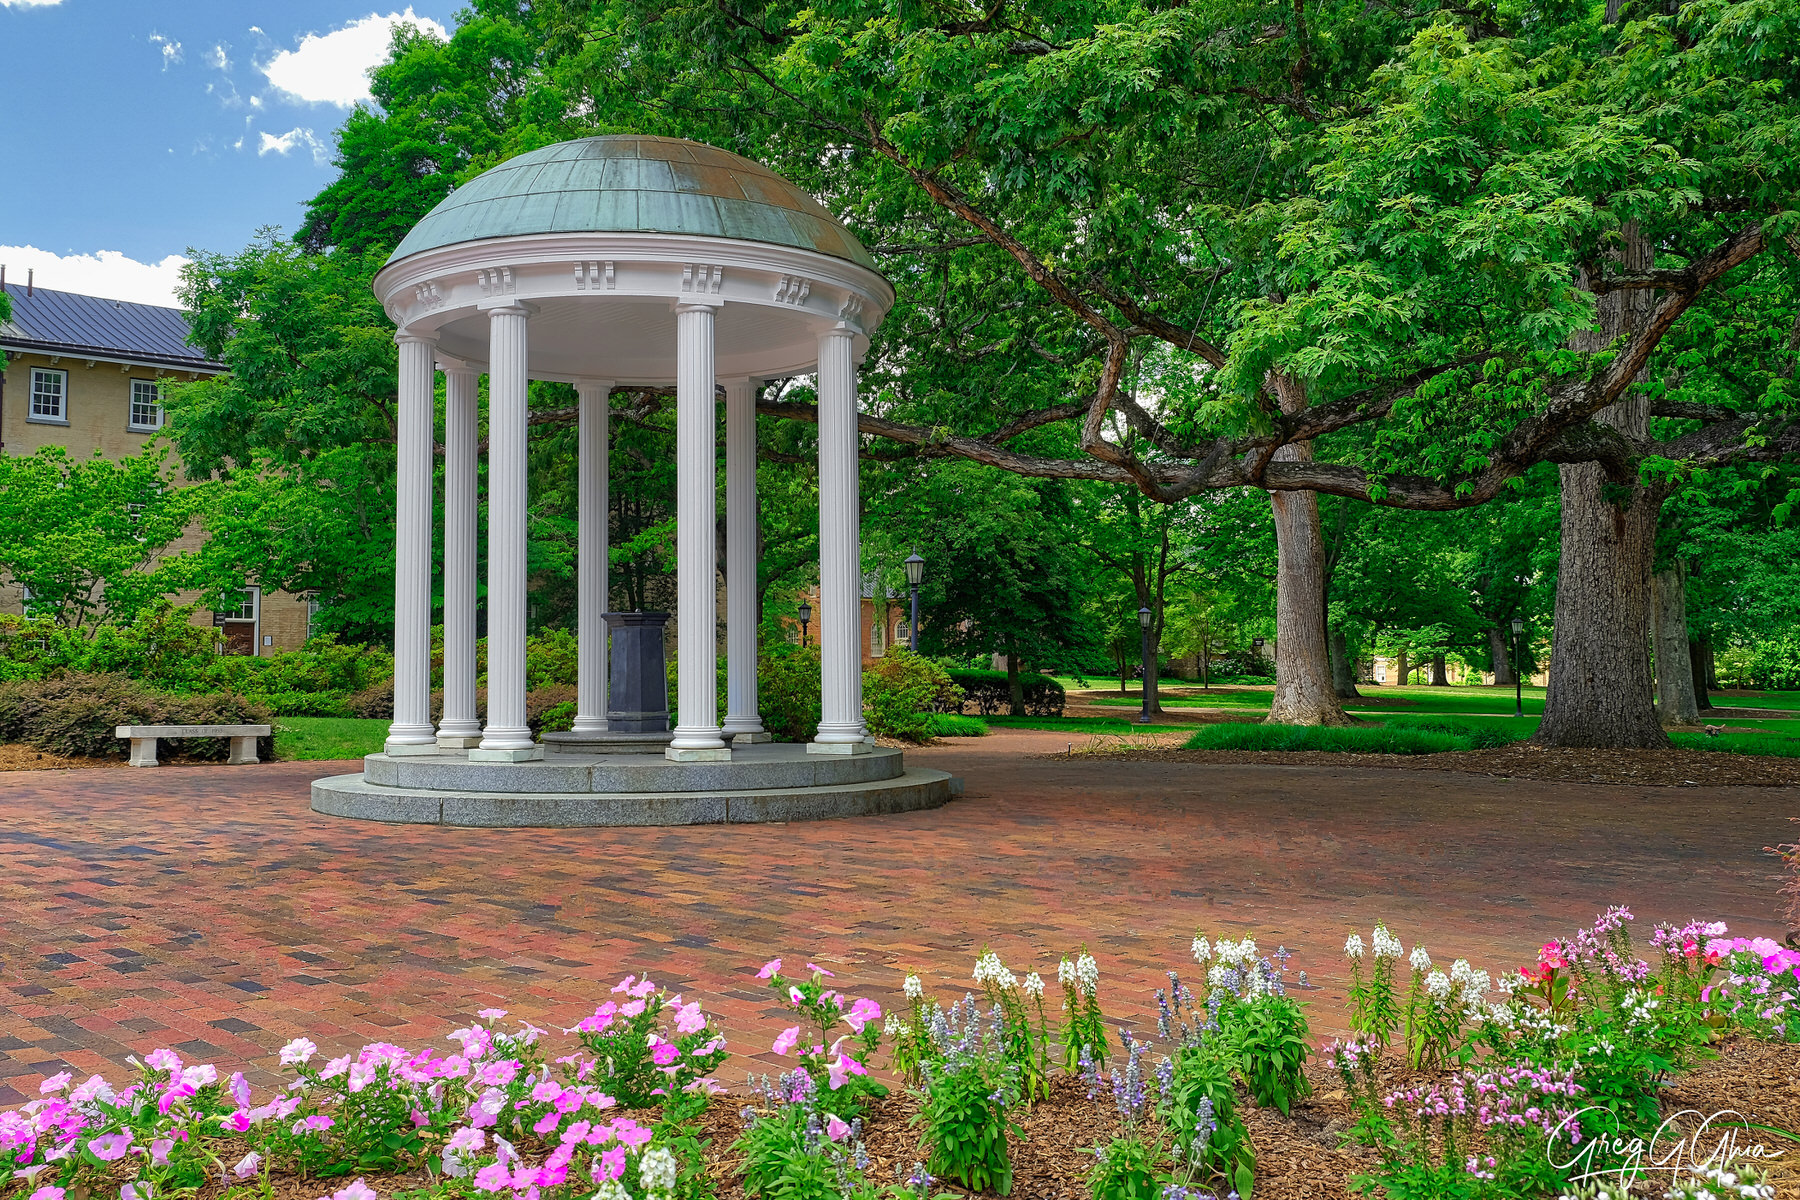 Beautfiul summer day in Chapel Hill, NC. The old well under Carolina blue skies. A symbol of excellence since 1894.